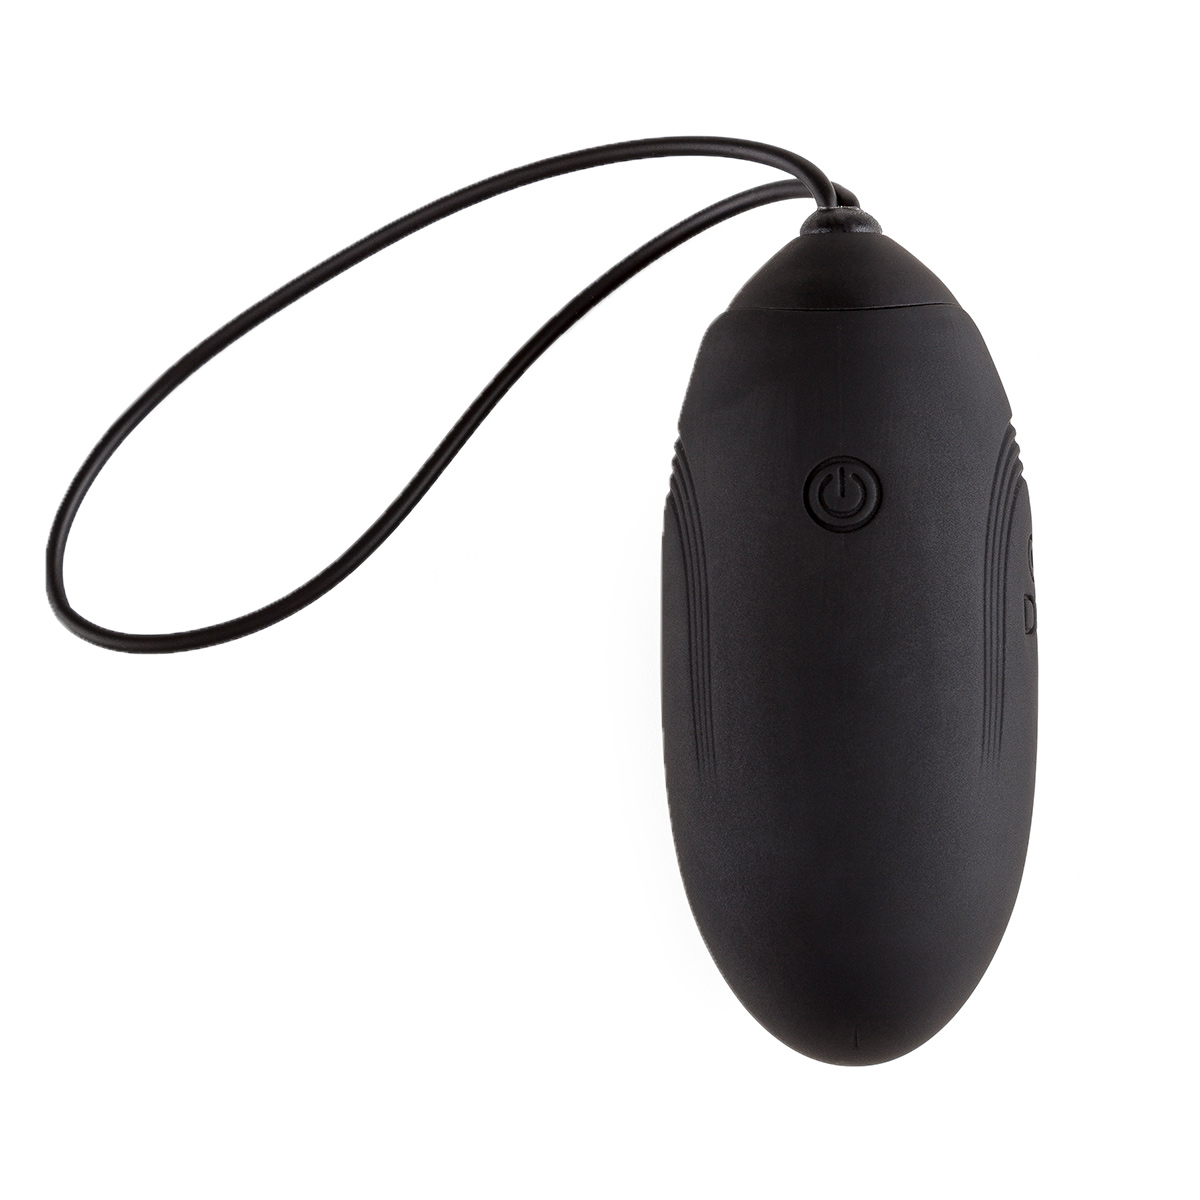 Rechargeable-Remote-Control-Egg-G5-Black-OPR-3090079-1